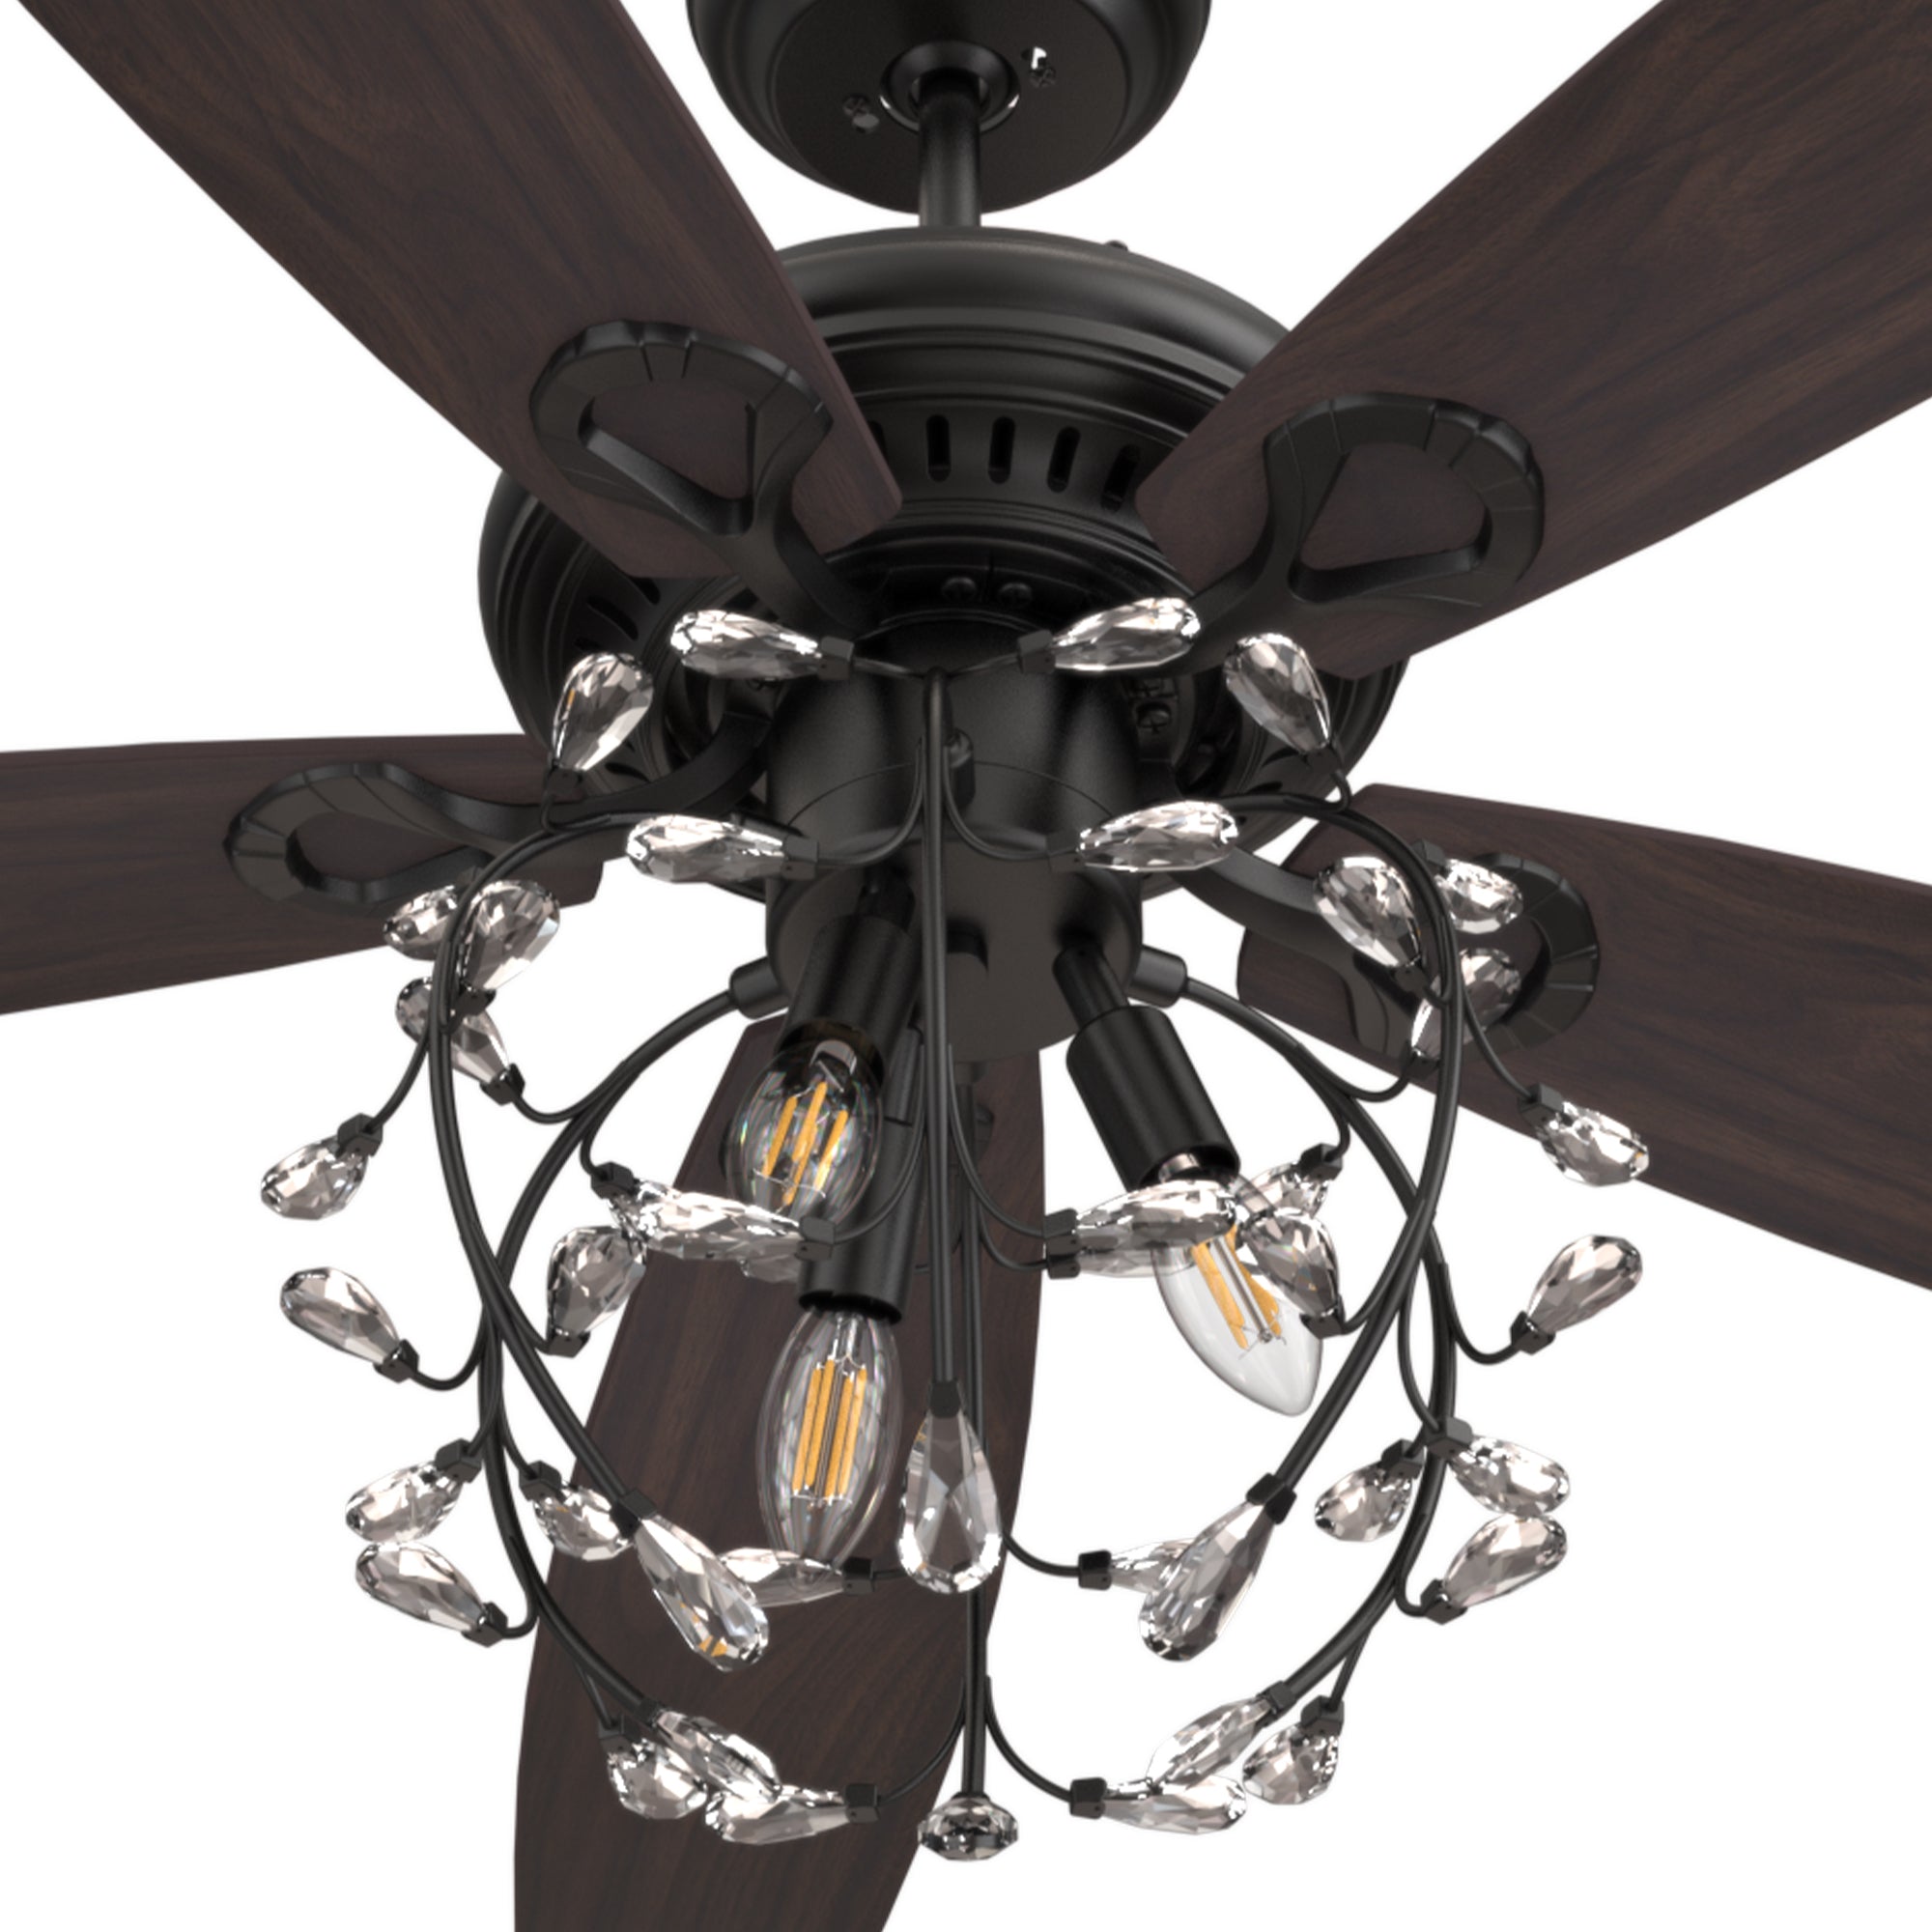 This Cedar 52''ceiling fan keeps your space cool, bright, and stylish. It is a soft modern masterpiece perfect for your large indoor living spaces. This ceiling fan is a simplicity designing with black finish, use elegant Plywood blades and compatible with LED bulb(Not included). The fan features remote control.